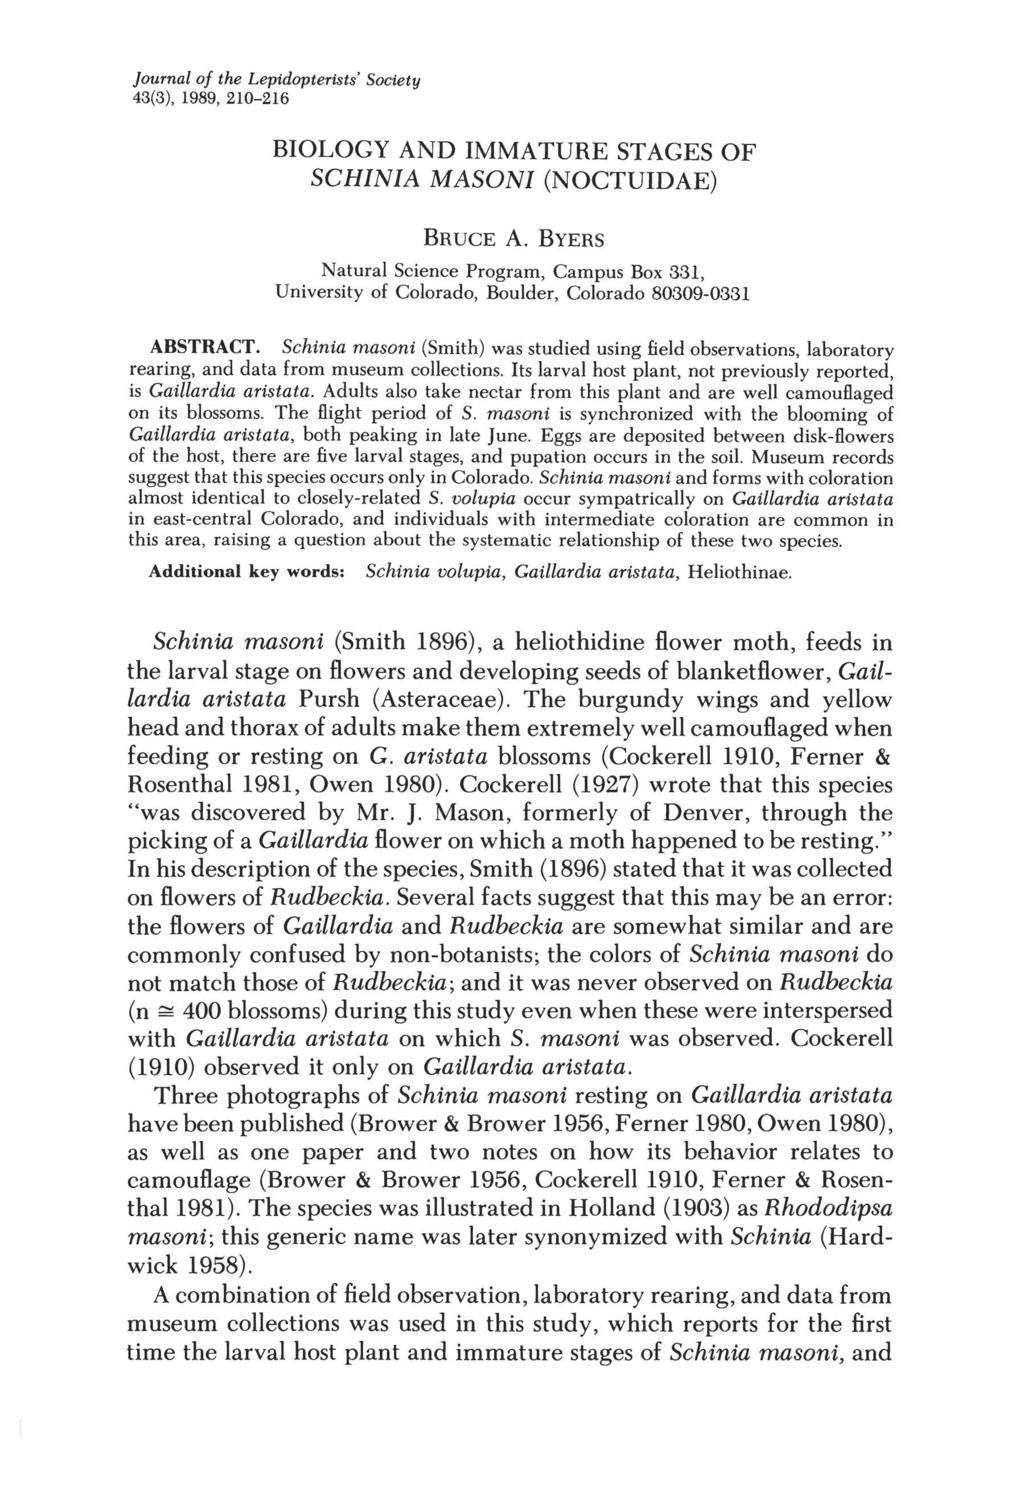 Journal of the Lepidopterists' Society 43(3), 1989, 210-216 BIOLOGY AND IMMATURE STAGES OF SCHINIA MASONI (NOCTUIDAE) BRUCE A.